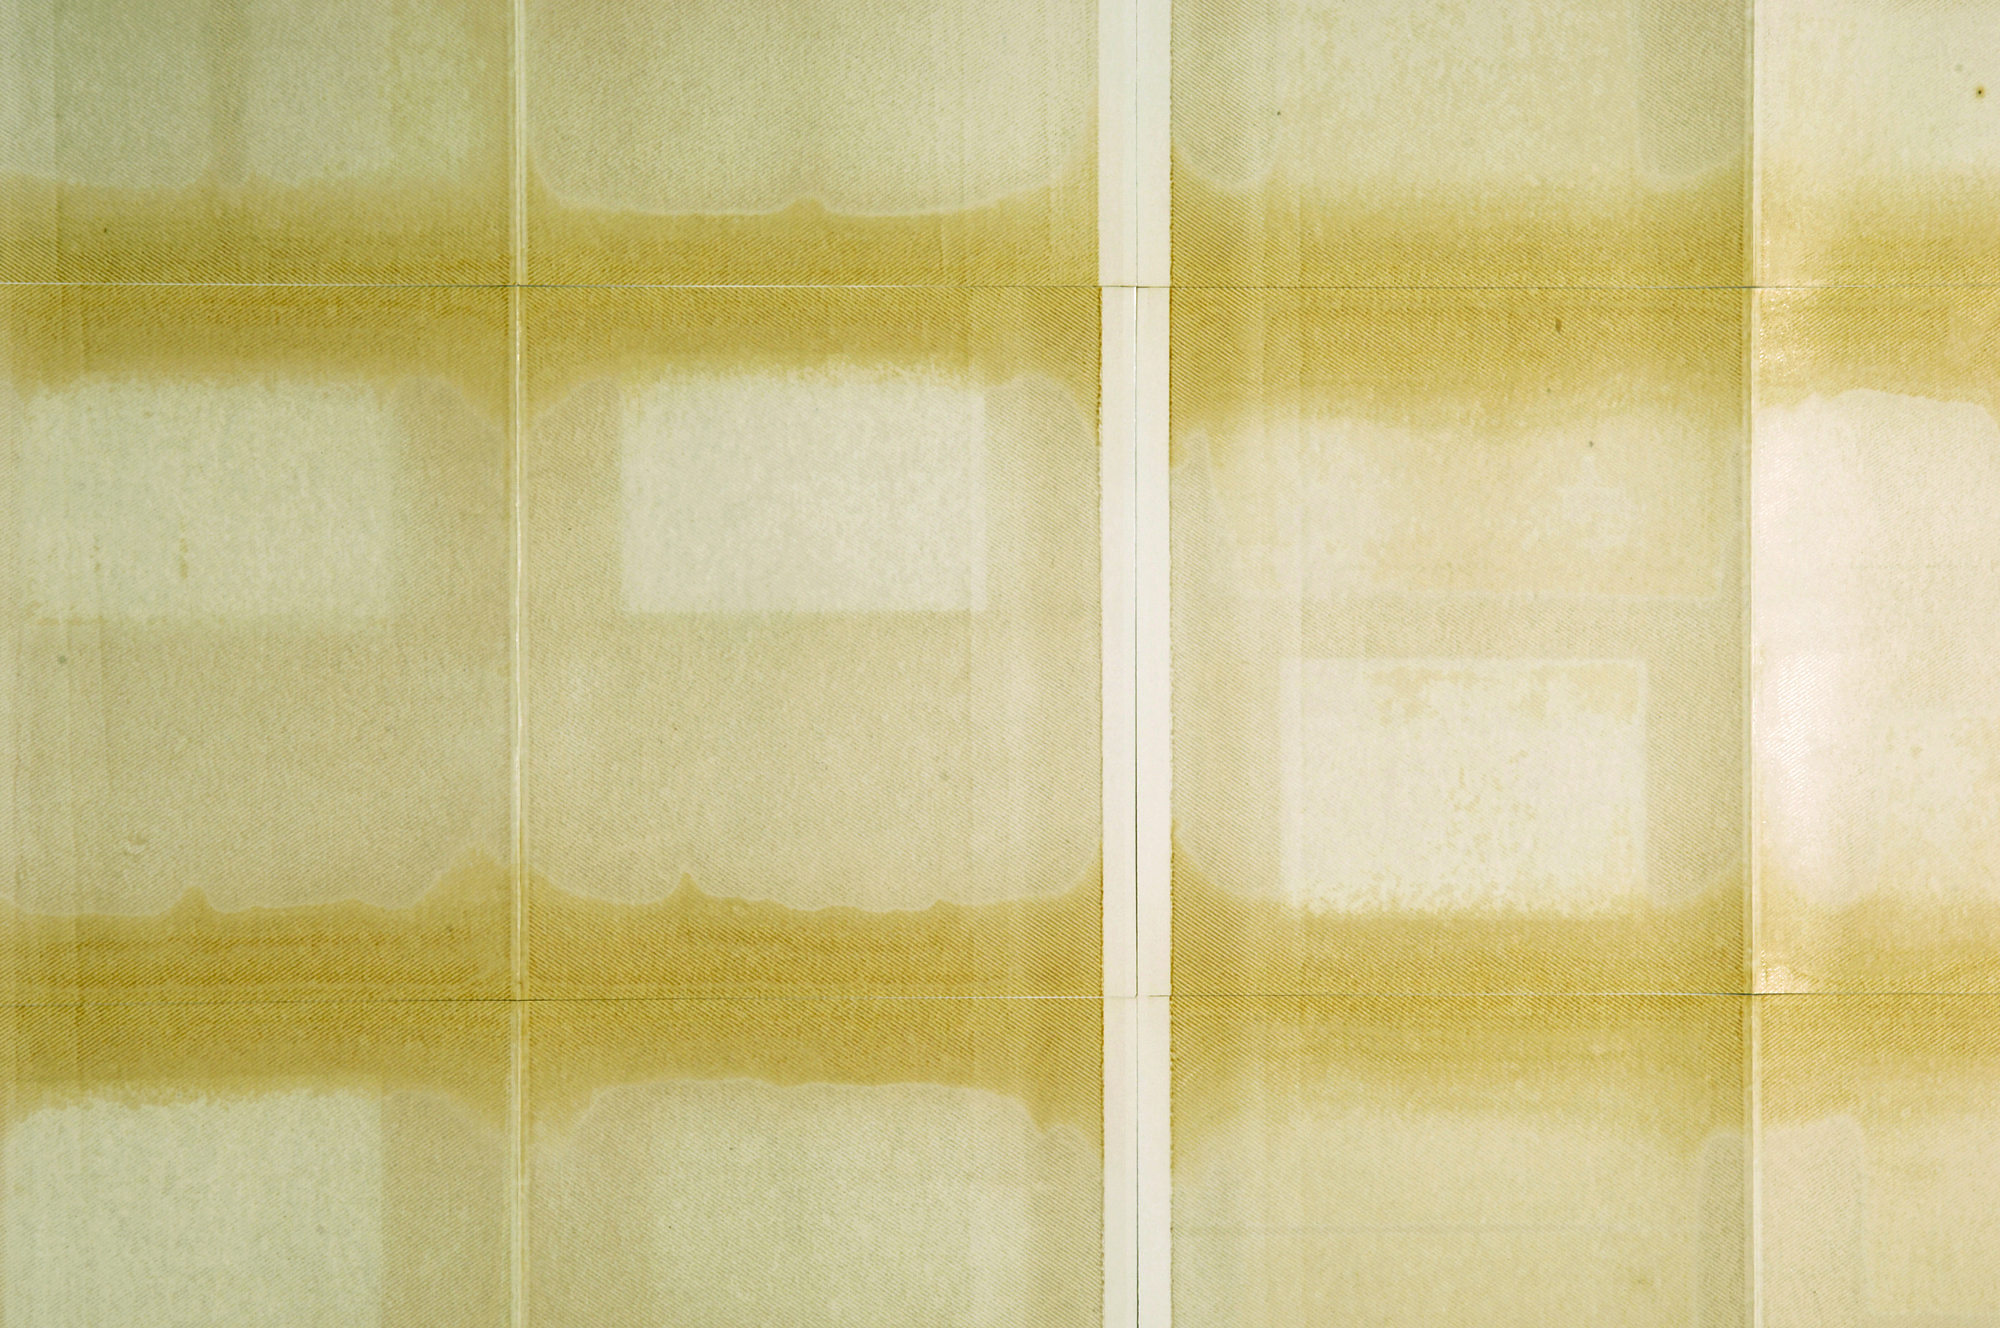 Eftihis Patsourakis, Sand 12, framed found album pages, 102.5 x 156 cm (40 3/8 x 61 3/8 in), 2009